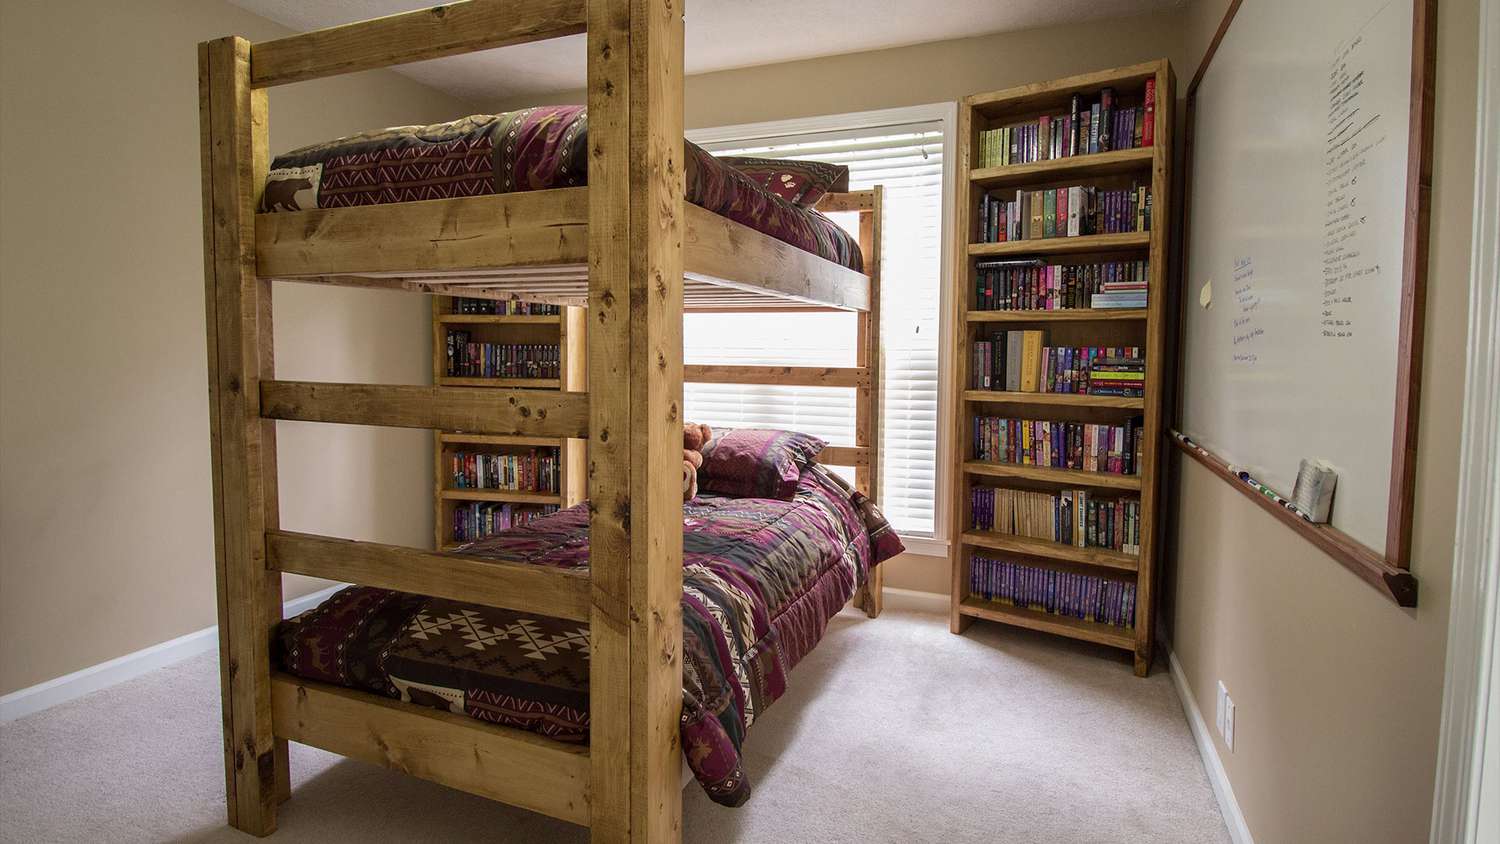 How To Build A Bunk Bed Frame